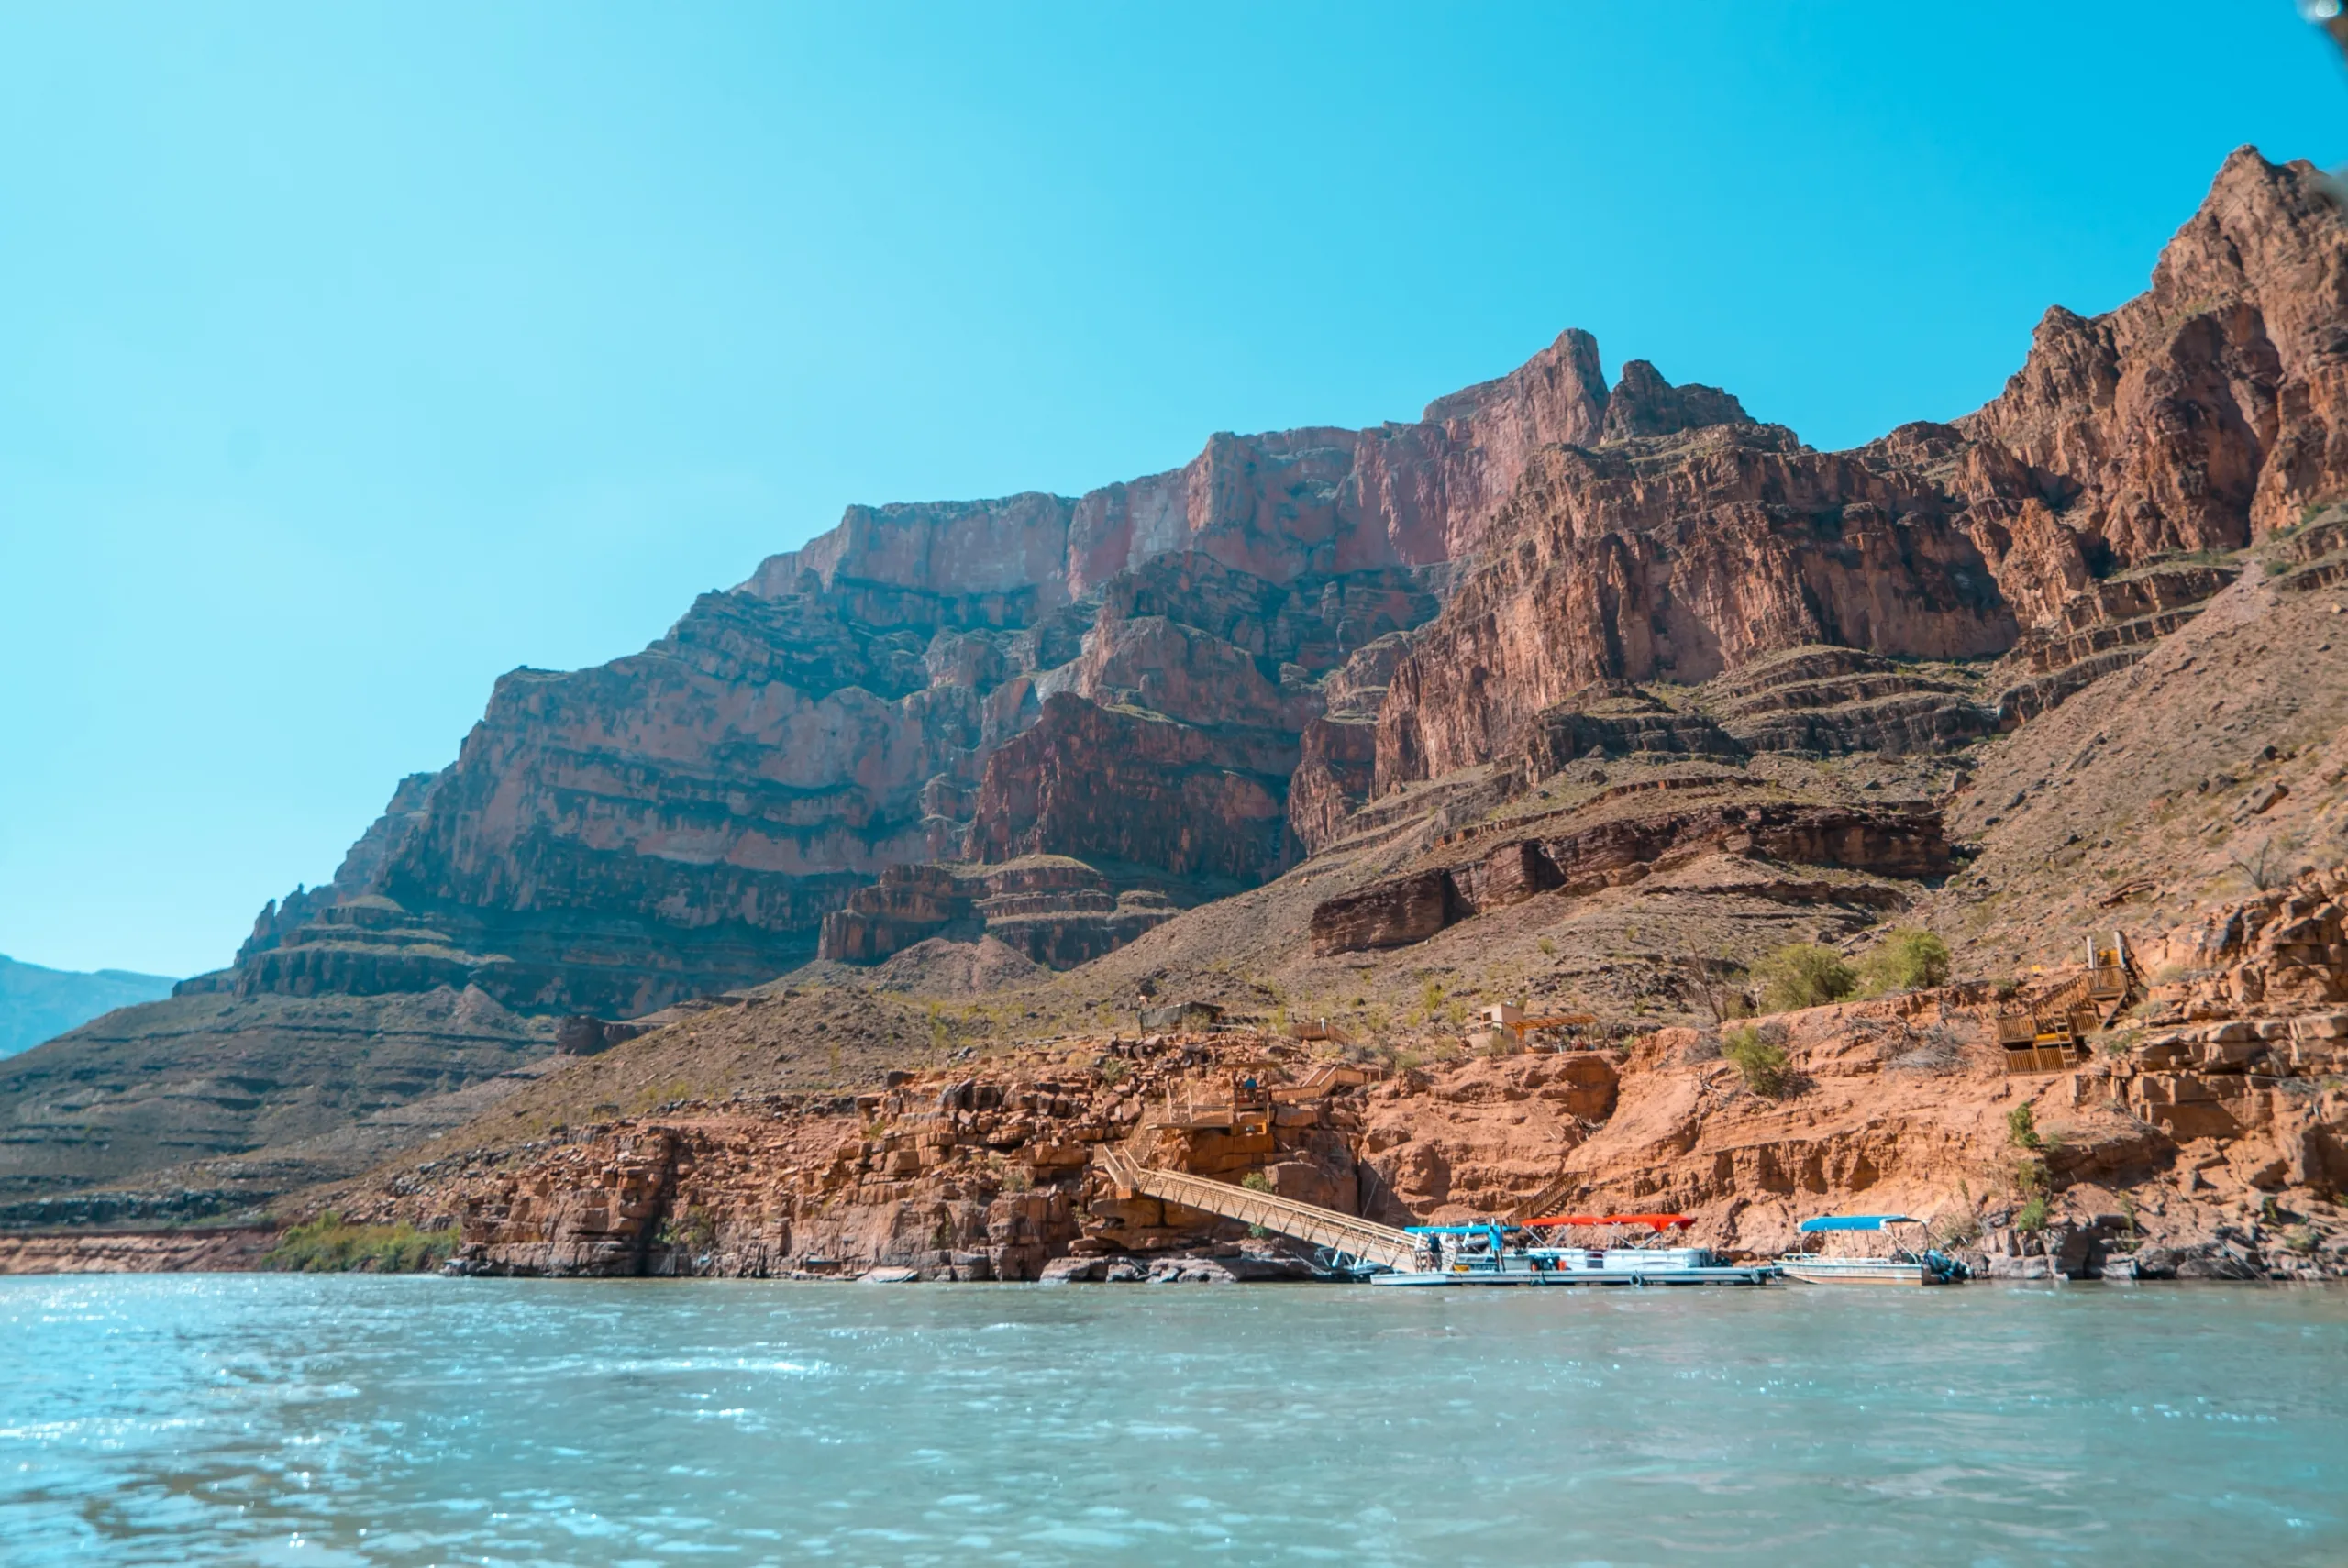 Boating on the Colorado River